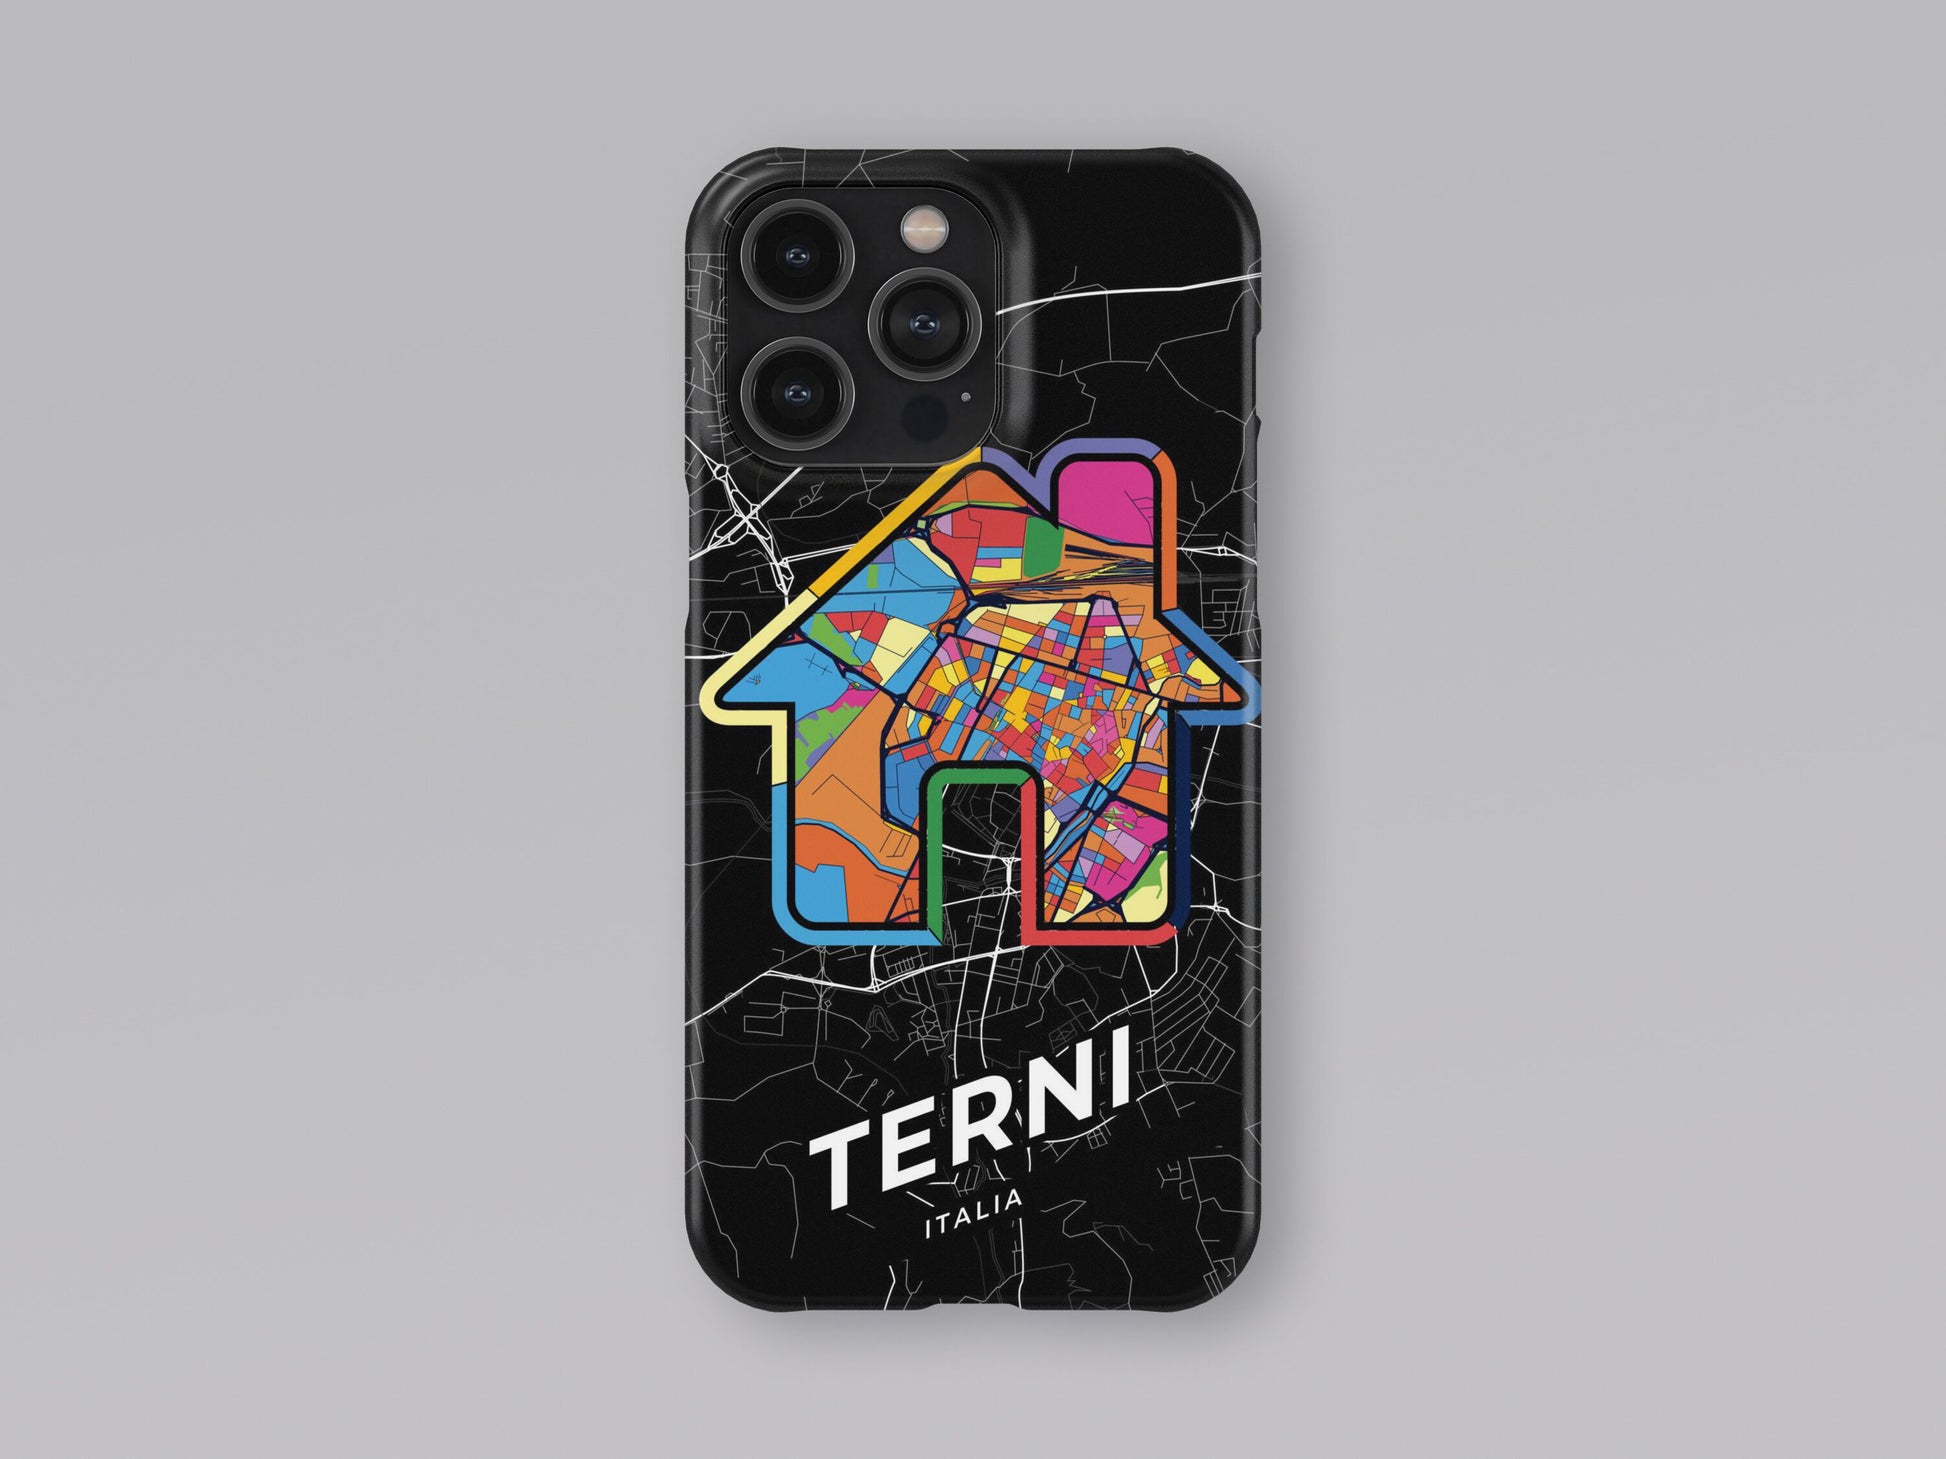 Terni Italy slim phone case with colorful icon 3